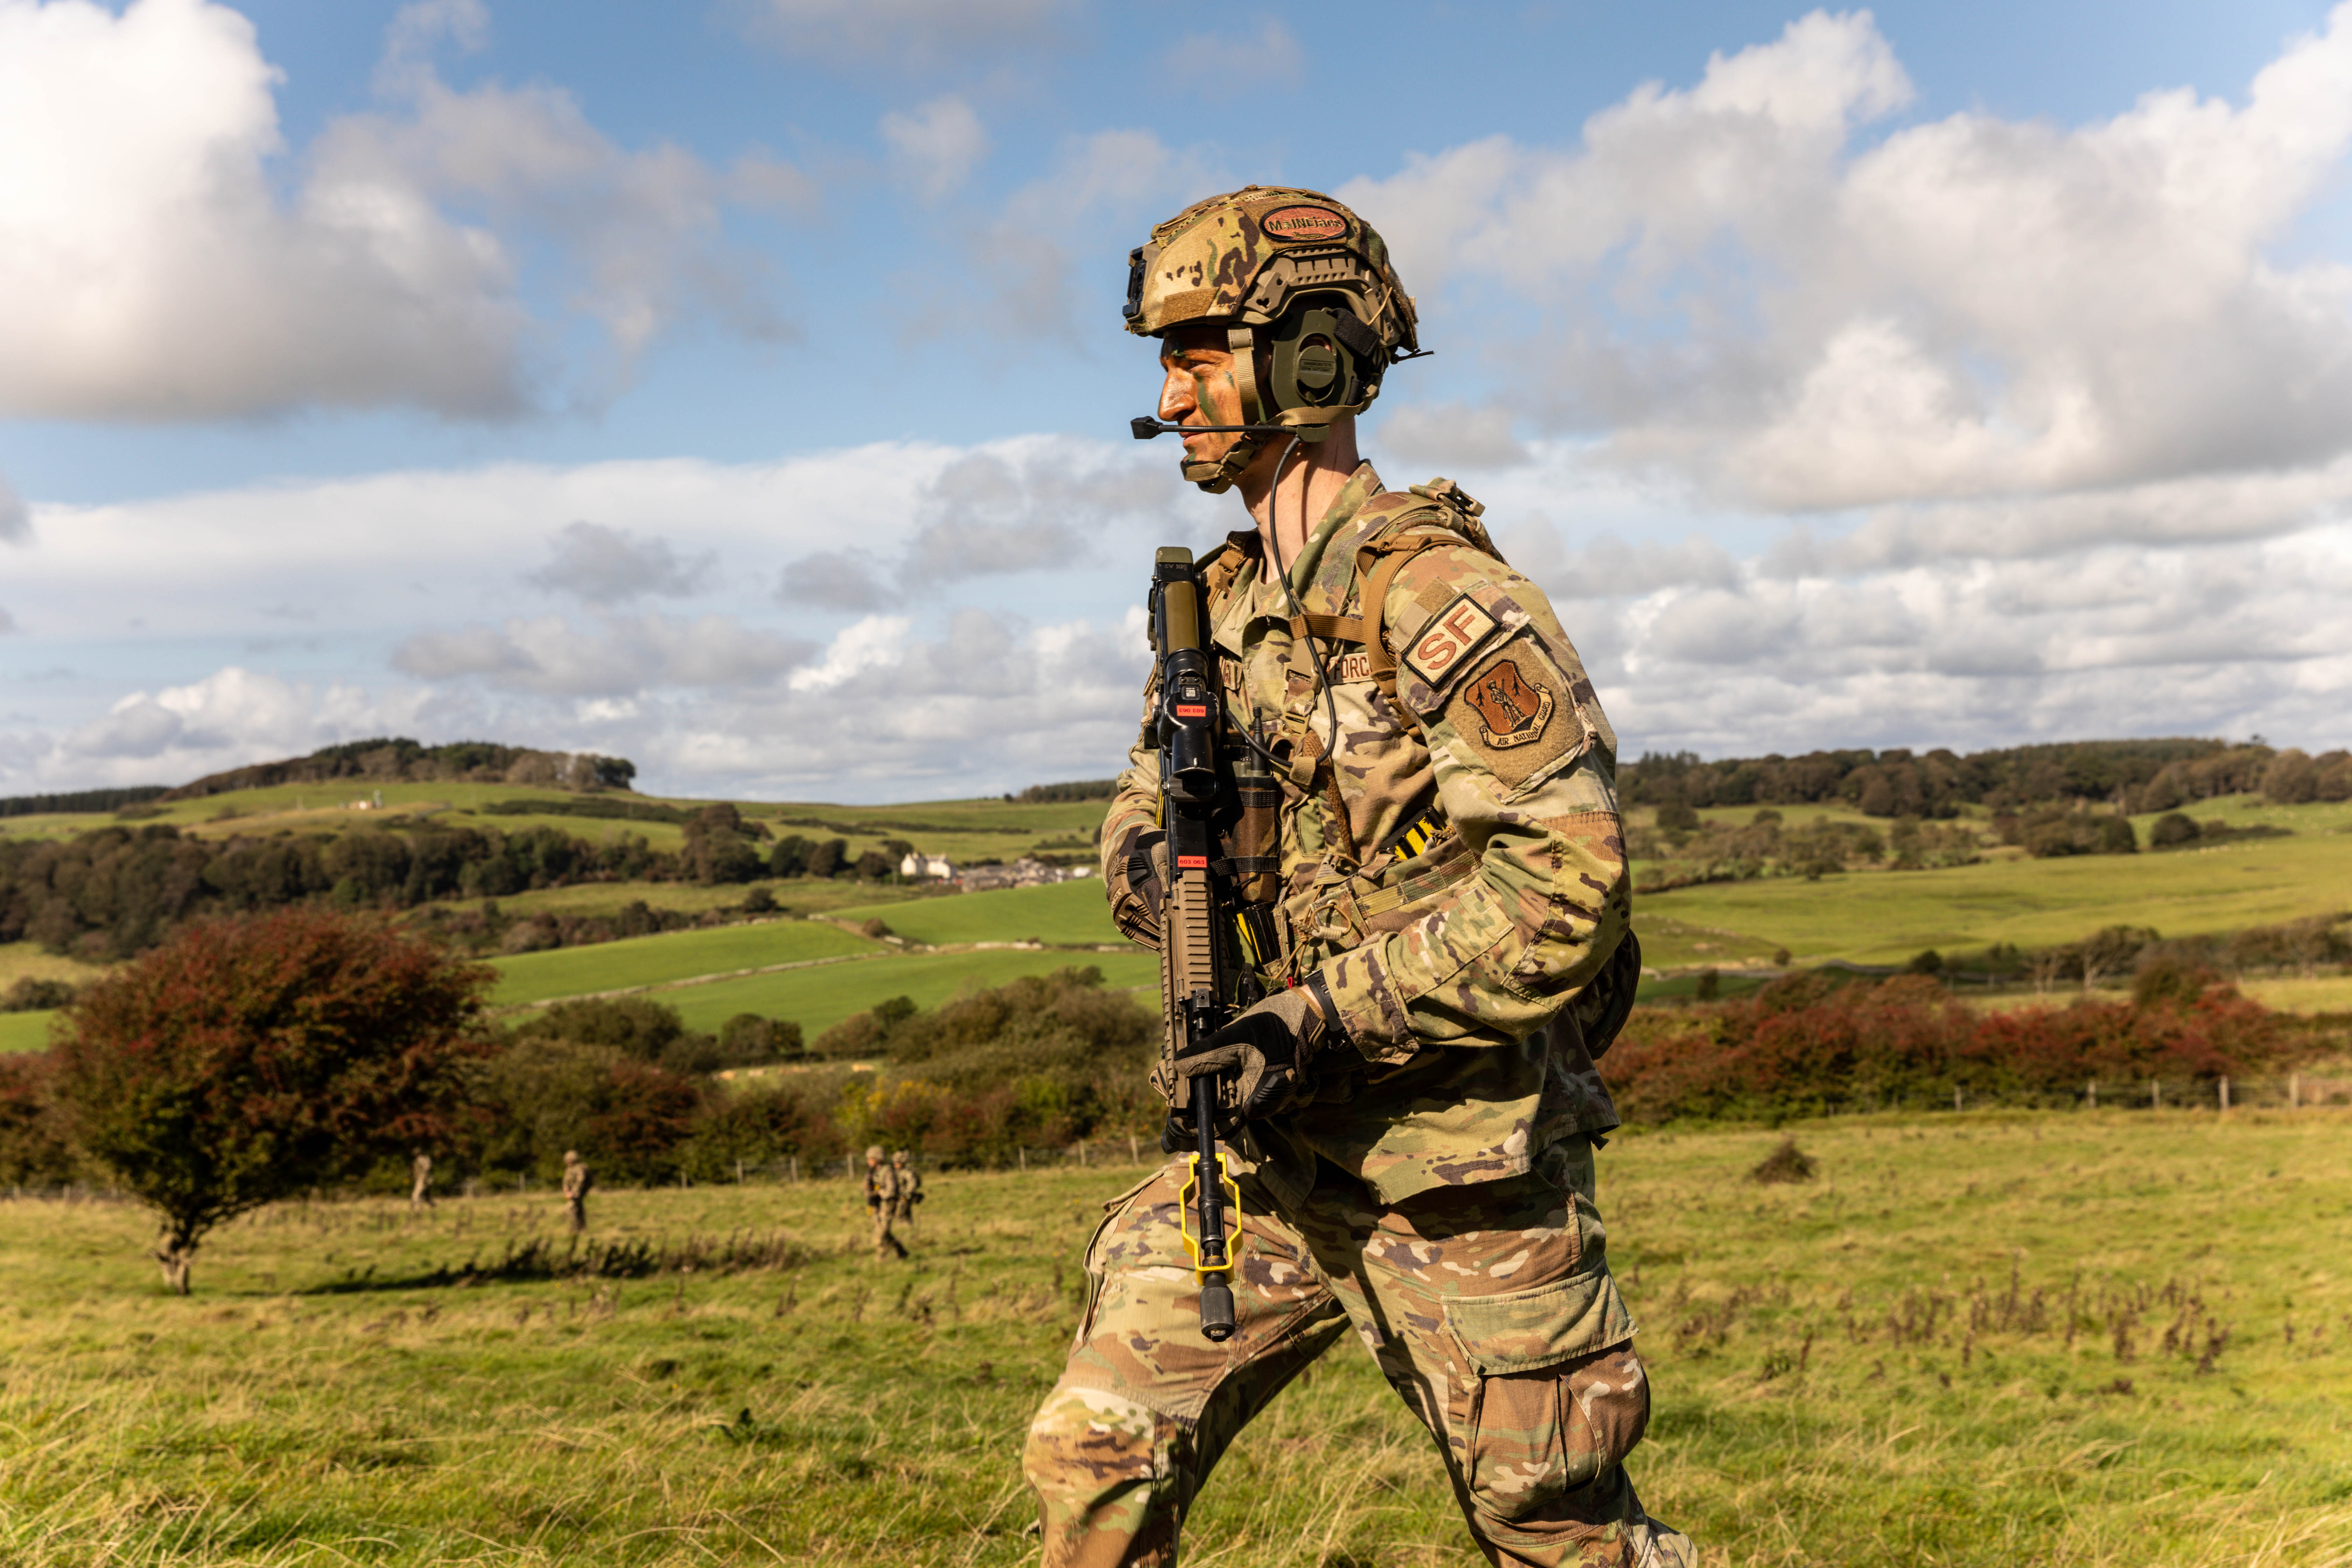 United States Air Force Reservist in combat uniform, carrying rifle against backdrop of Scottish countryside.